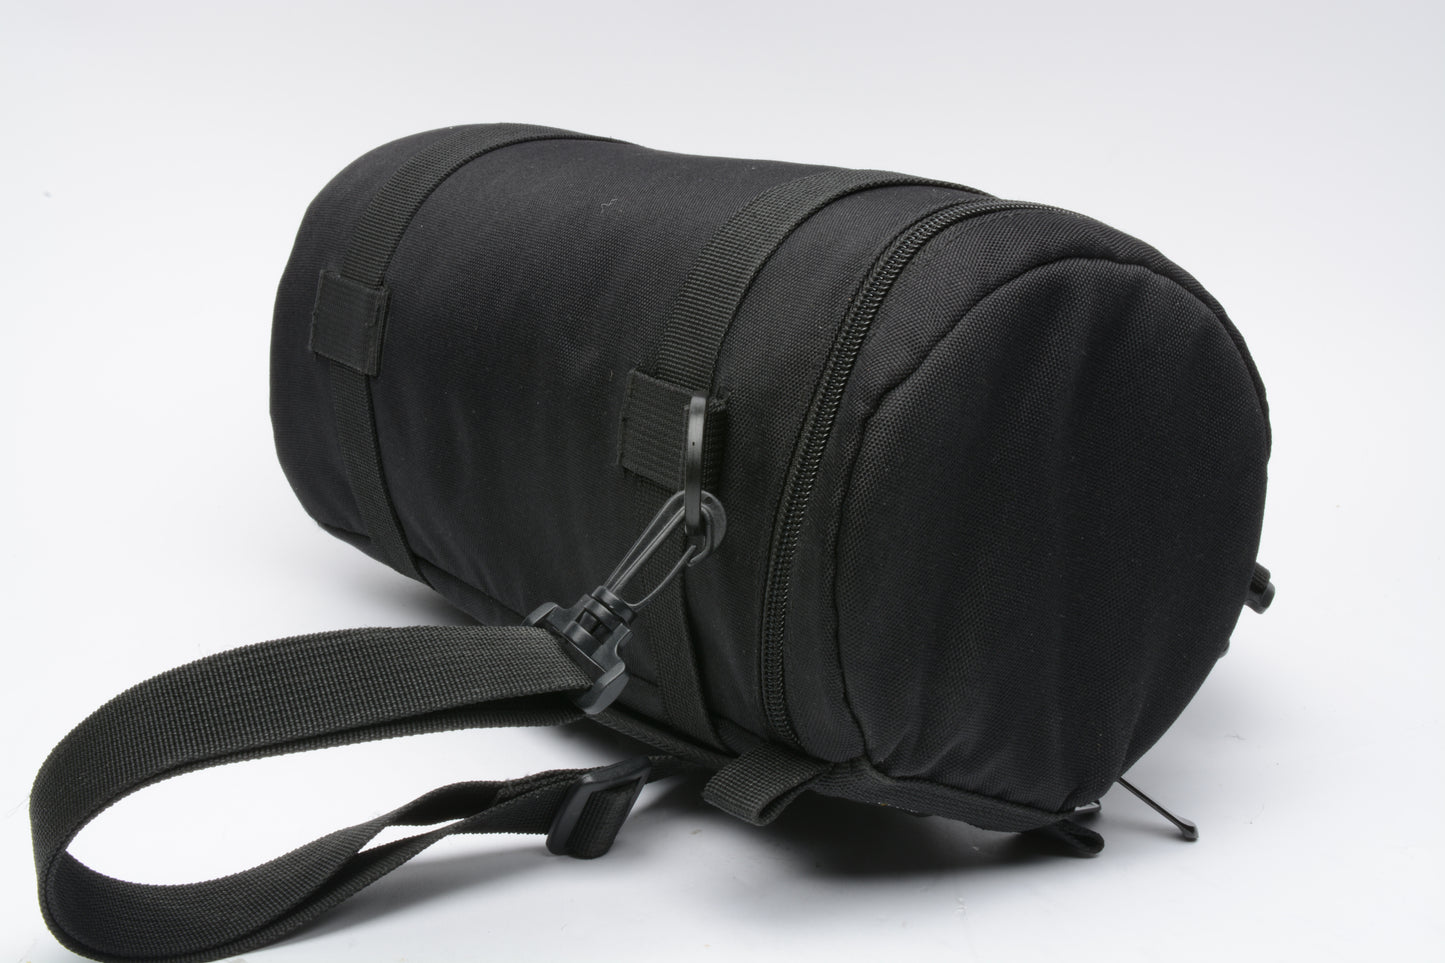 Promaster padded large lens case ~12" x 5.5" wide w/strap, clean